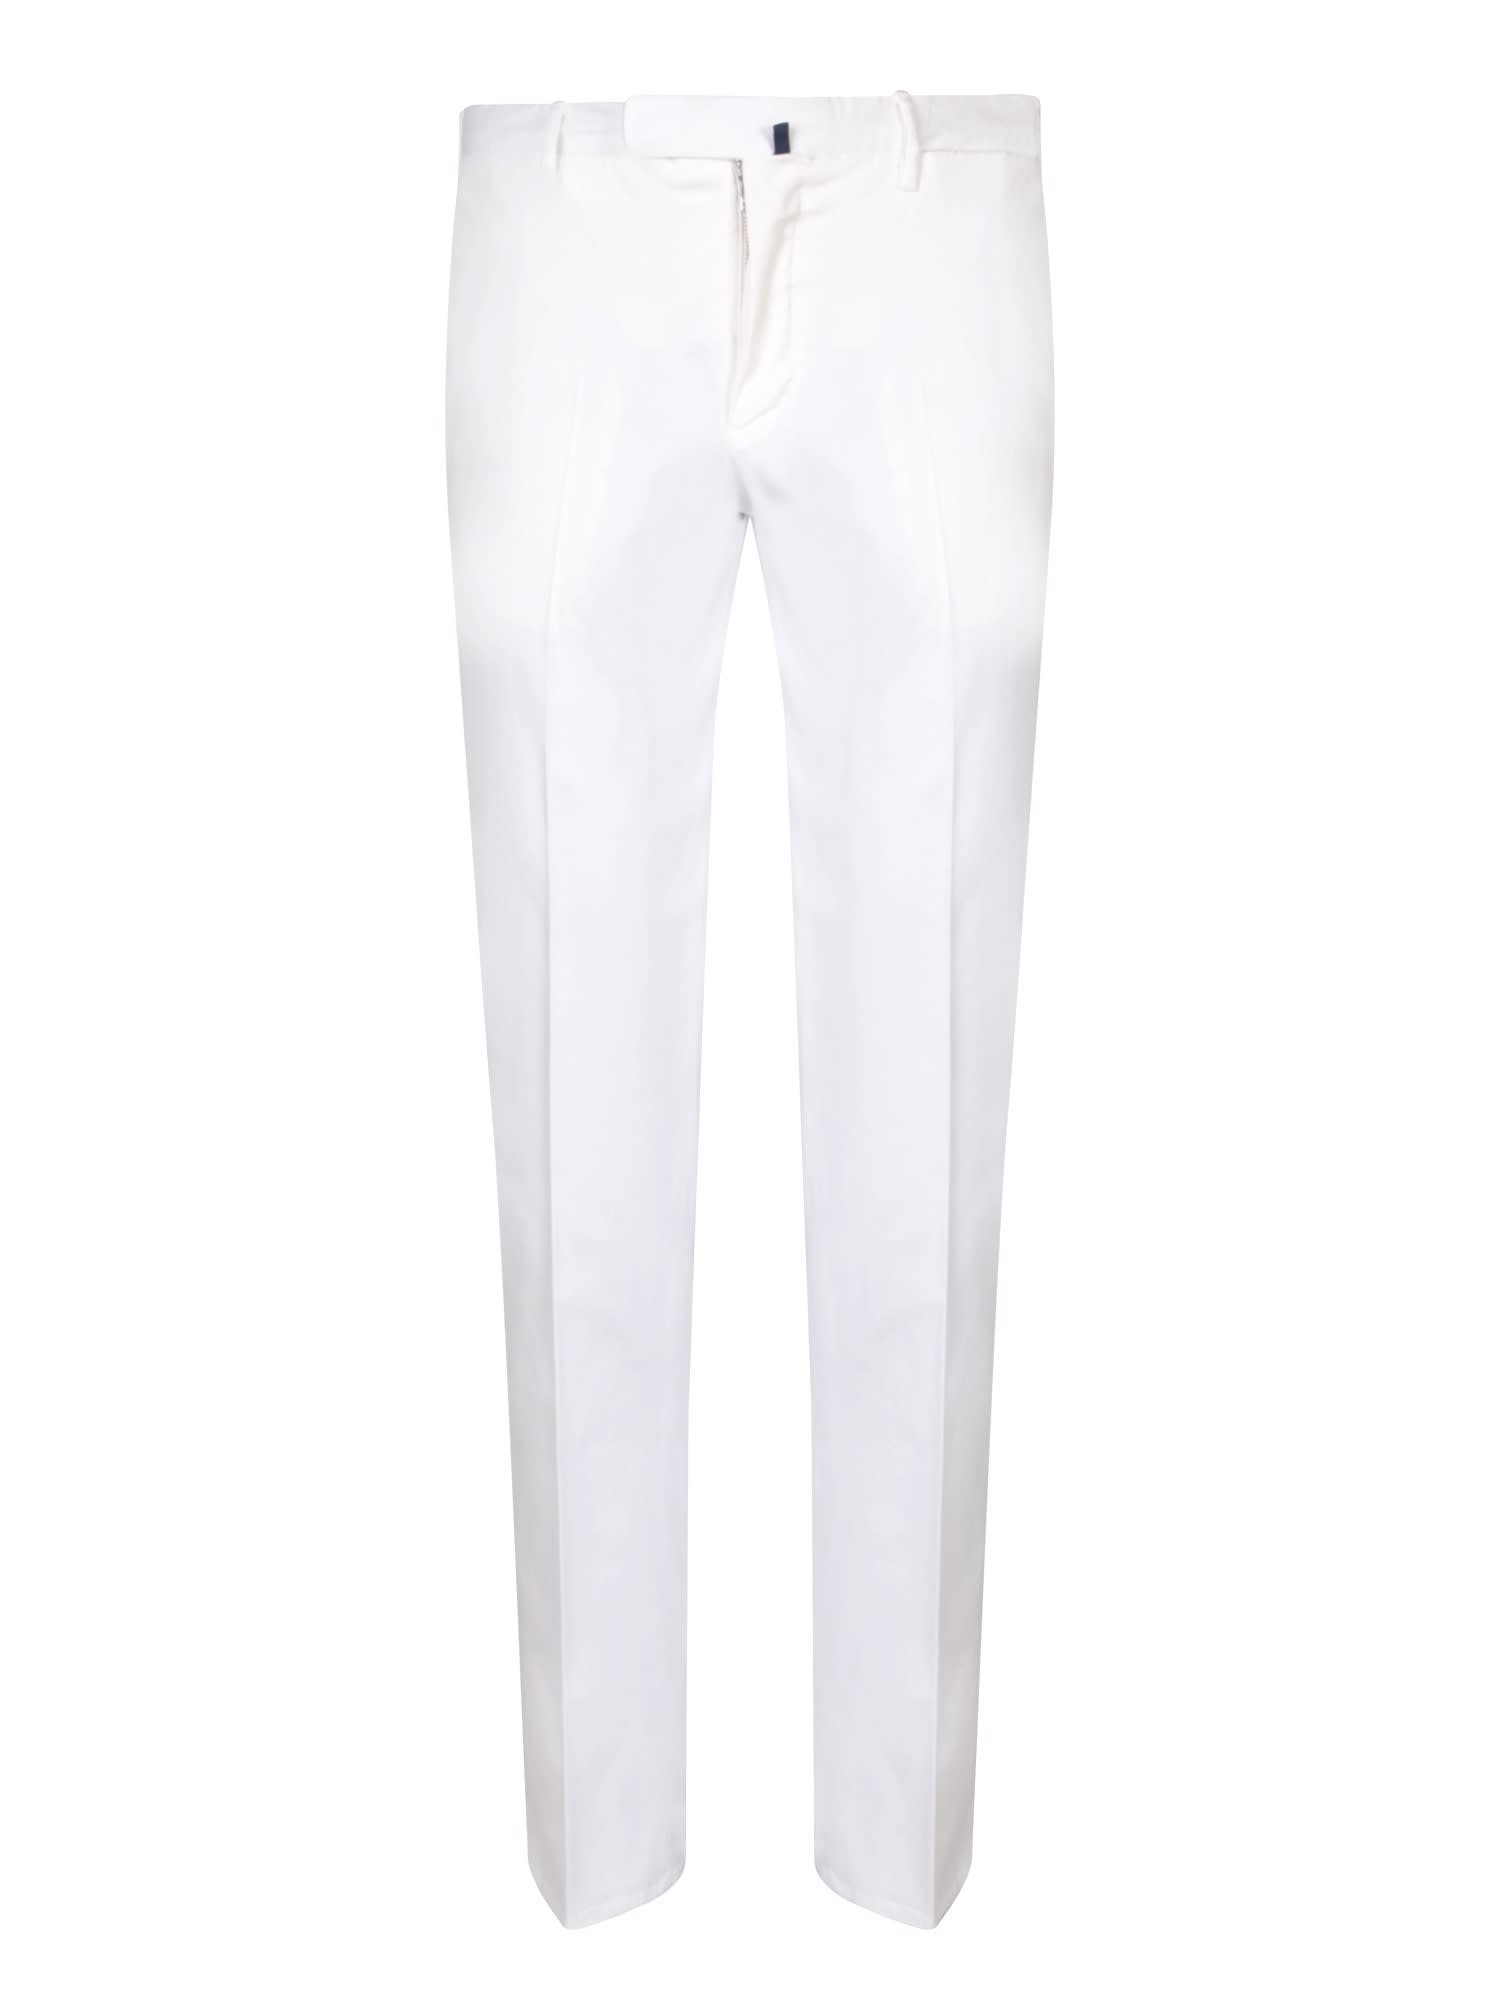 Slim Fit White Trousers